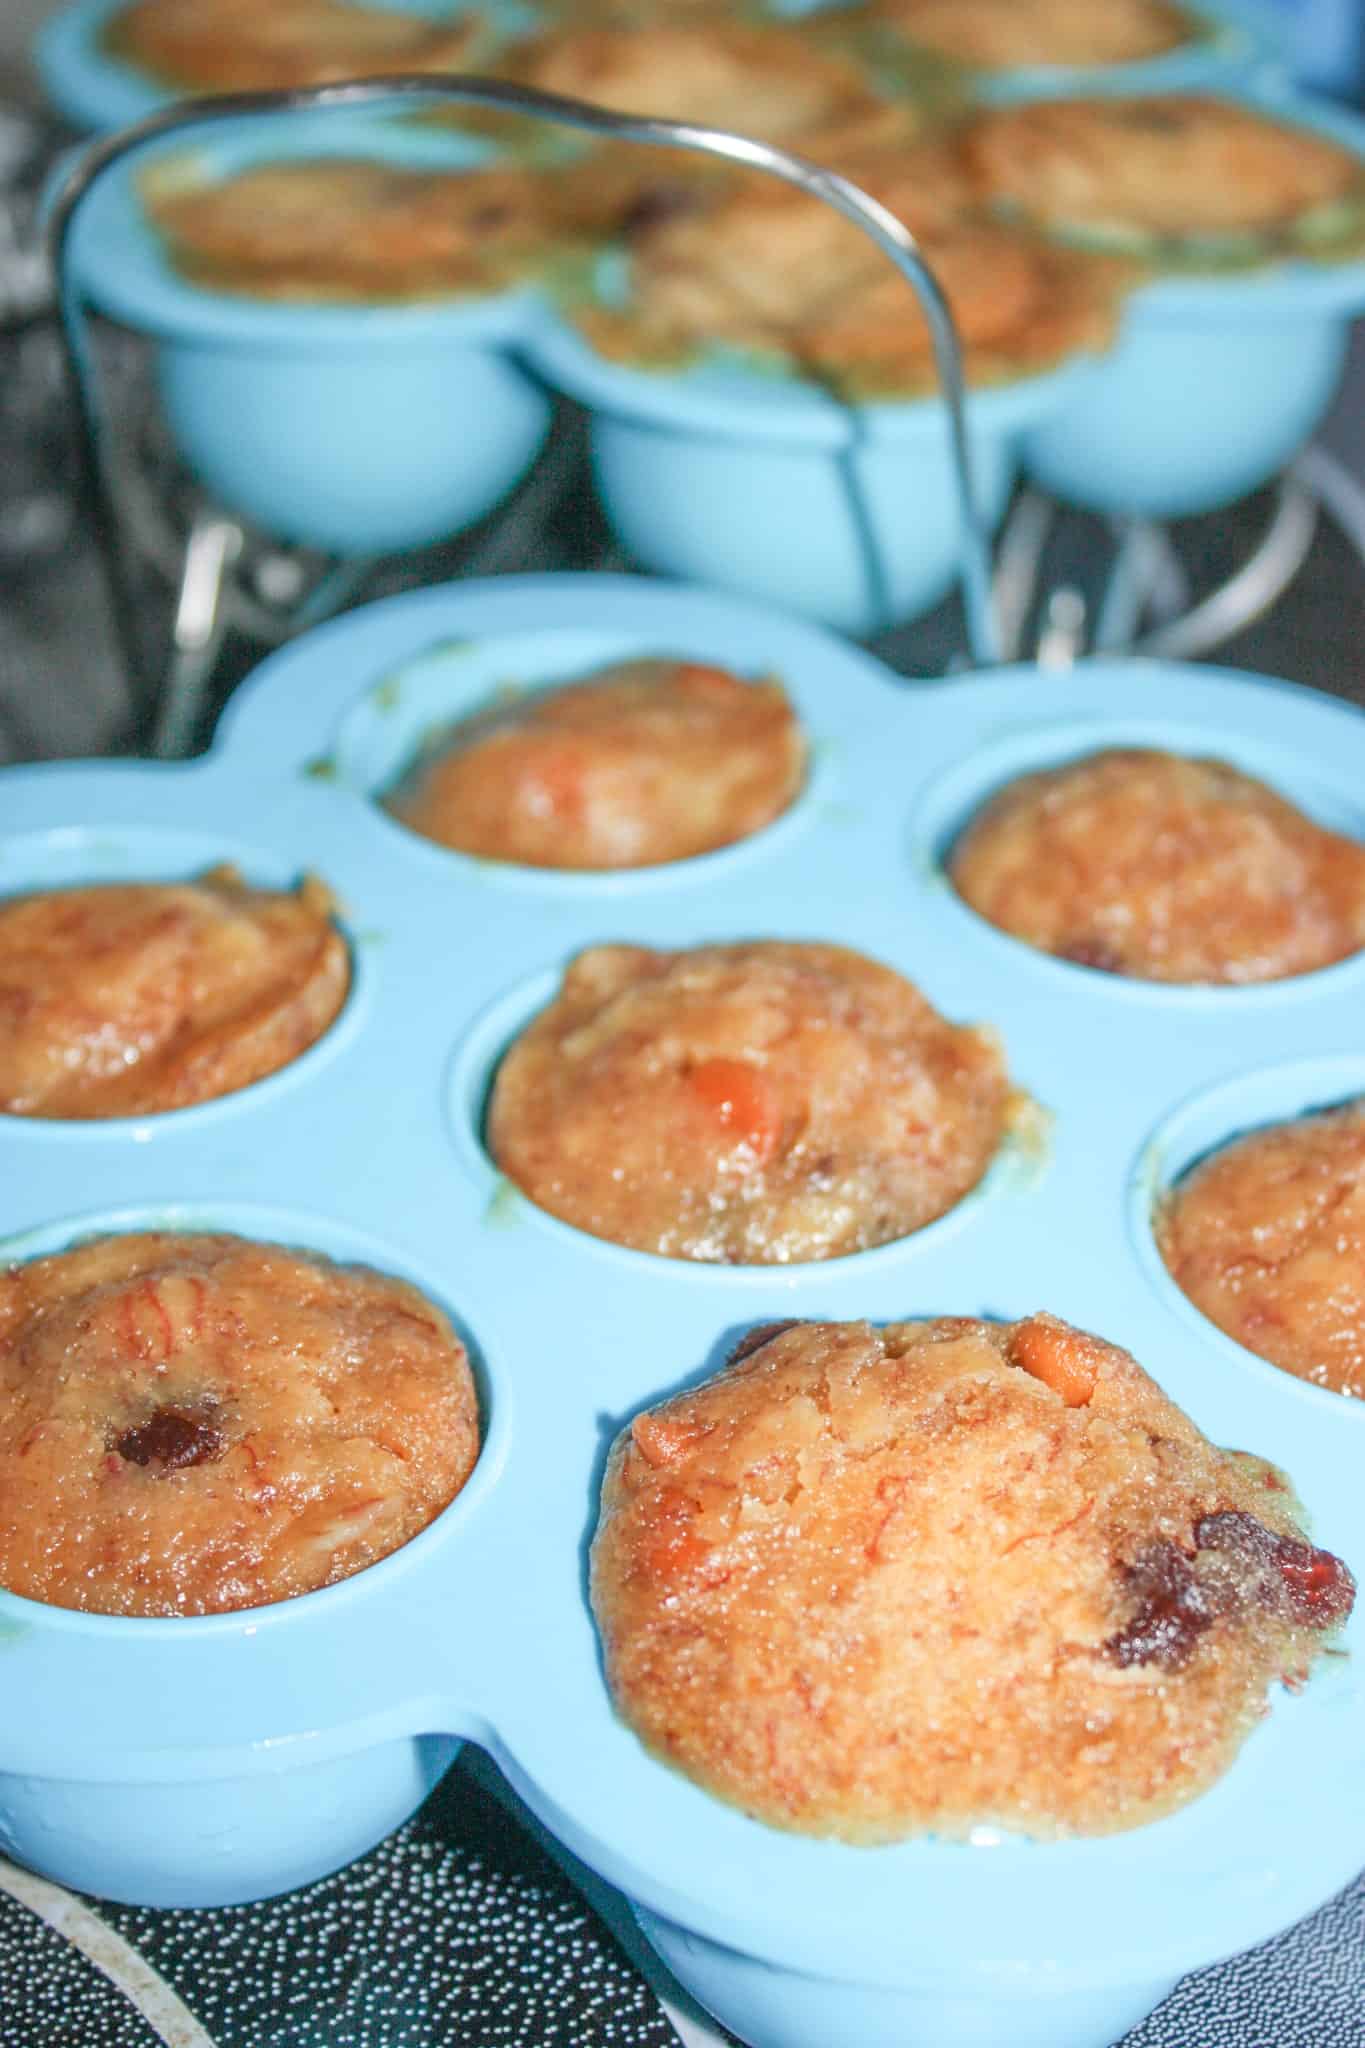 Instant Pot Peanut Butter Banana Bites are an easy pressure cooker snack.  These gluten free "bites" are a flavourful muffin variation that your whole family will enjoy!